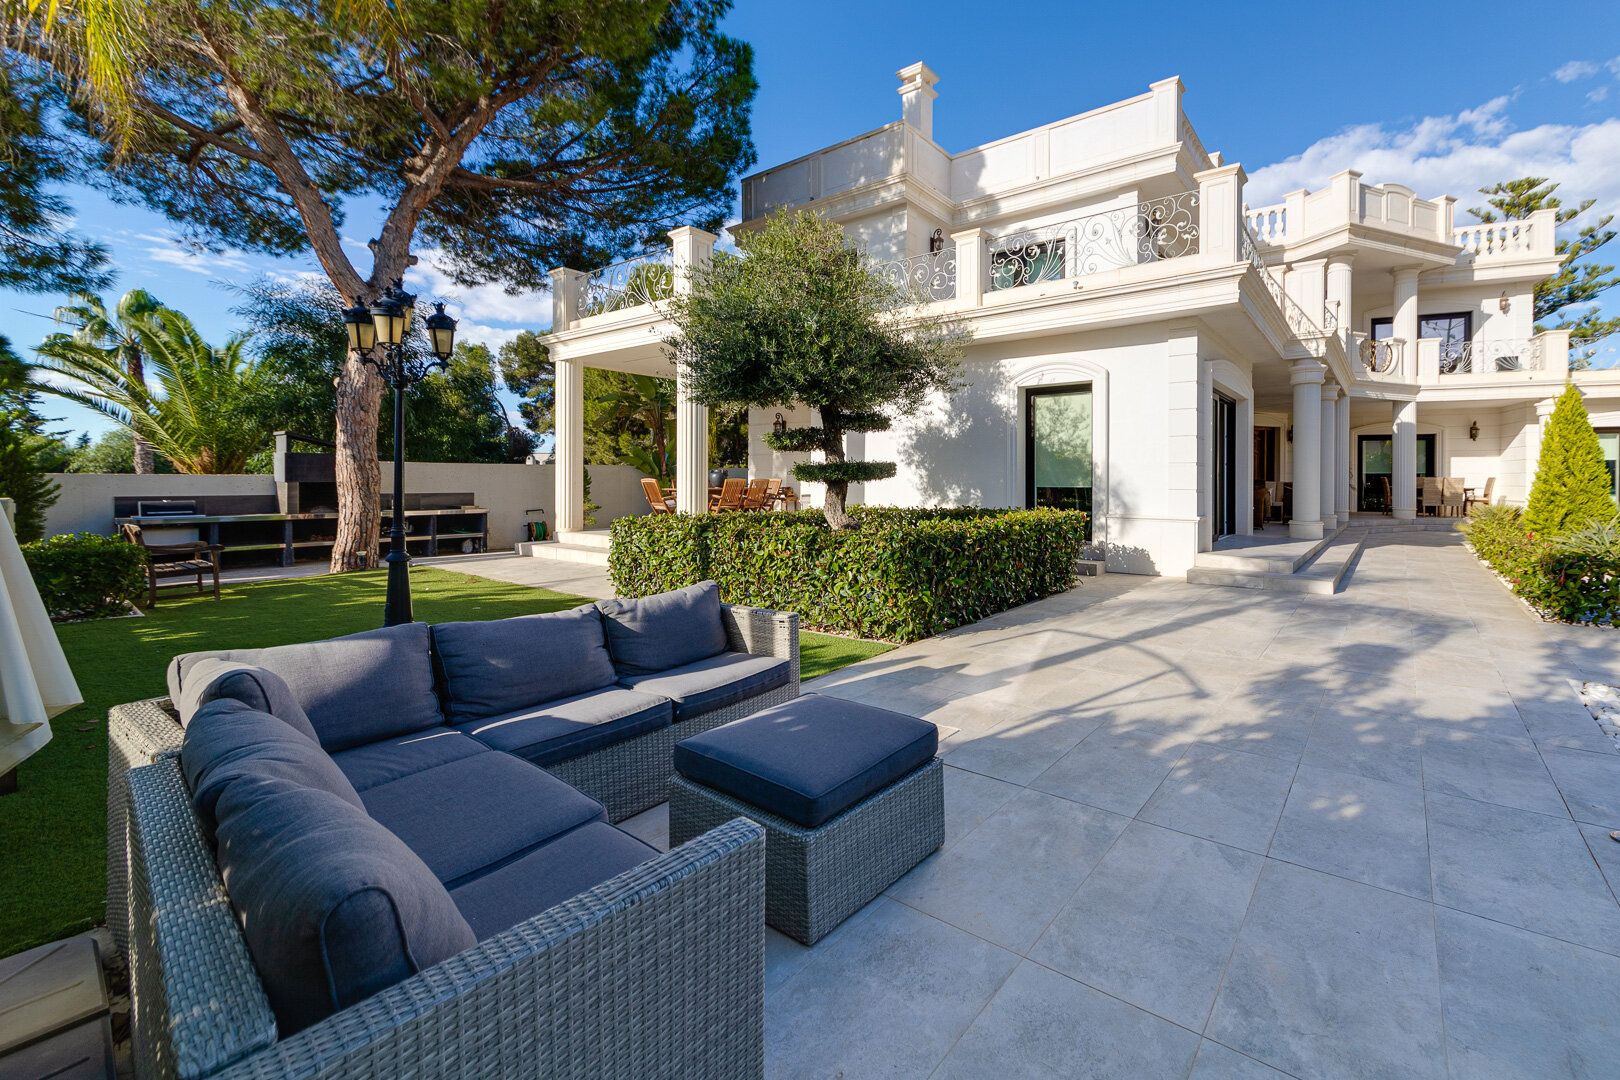 5 Bedroom Classic Luxury Villa with Modern Construction - Campoamor